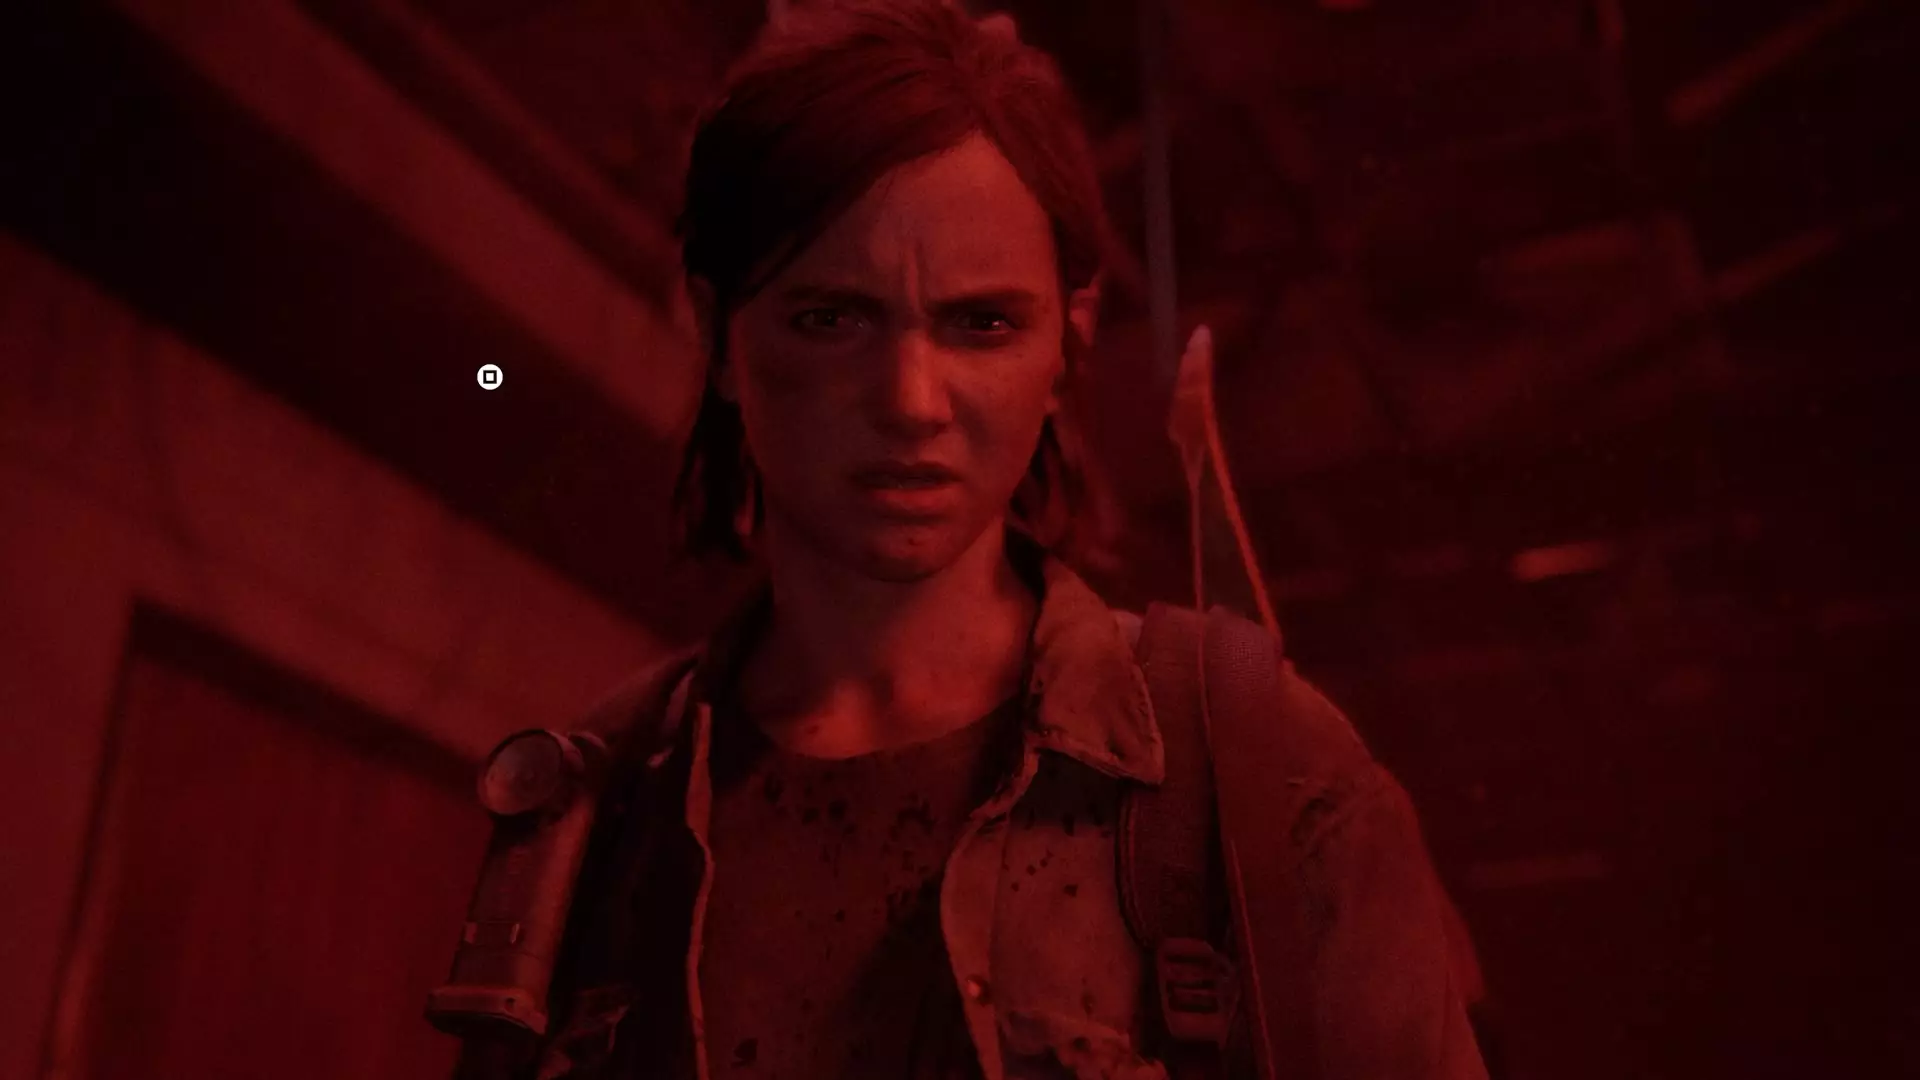 Ellie waits for the player to press the square button, to kill Nora /